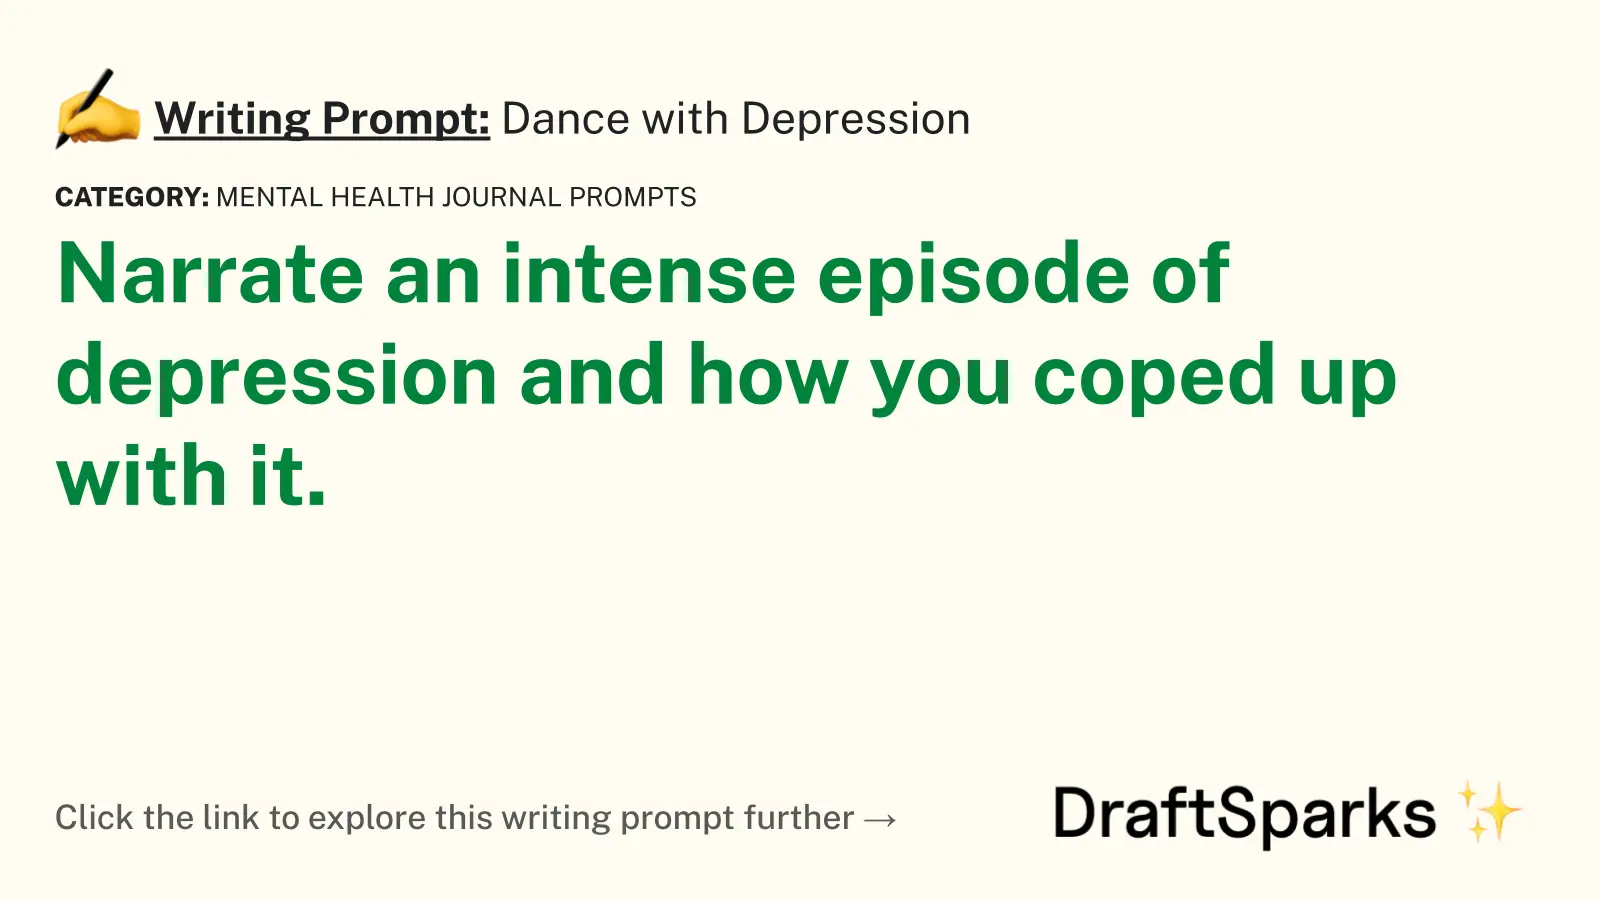 Dance with Depression